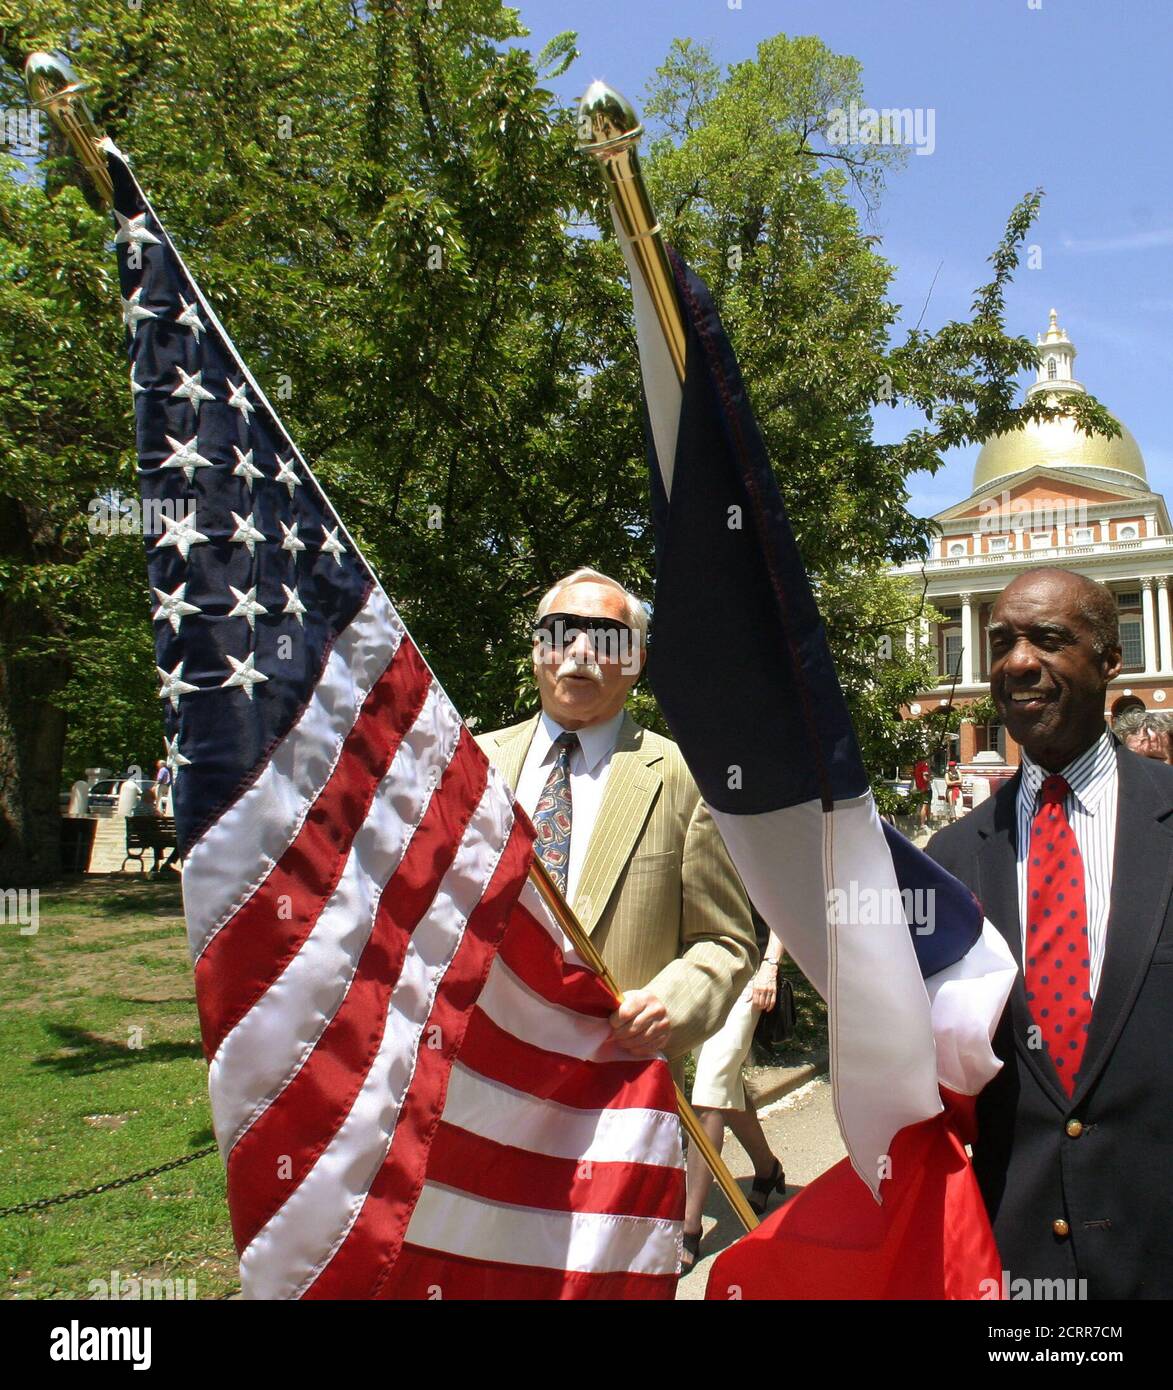 U.S. citizens John Hermanson (L) and Enoch Woodhouse (R) of the Massachusetts Lafayette society carry United States and French flags side by side from ceremonies commemorating the 169th anniversary of the death of the Marquis de Lafayette at the Massachusetts Statehouse (rear) in Boston, May 20, 2003. Lafayette was a French General and politician who became a hero in the American revolutionary war. French and local officials joined together at the event to reassert the common democratic values of the two countries despite recent diplomatic and military policy differences. REUTERS/Jim Bourg  JR Stock Photo